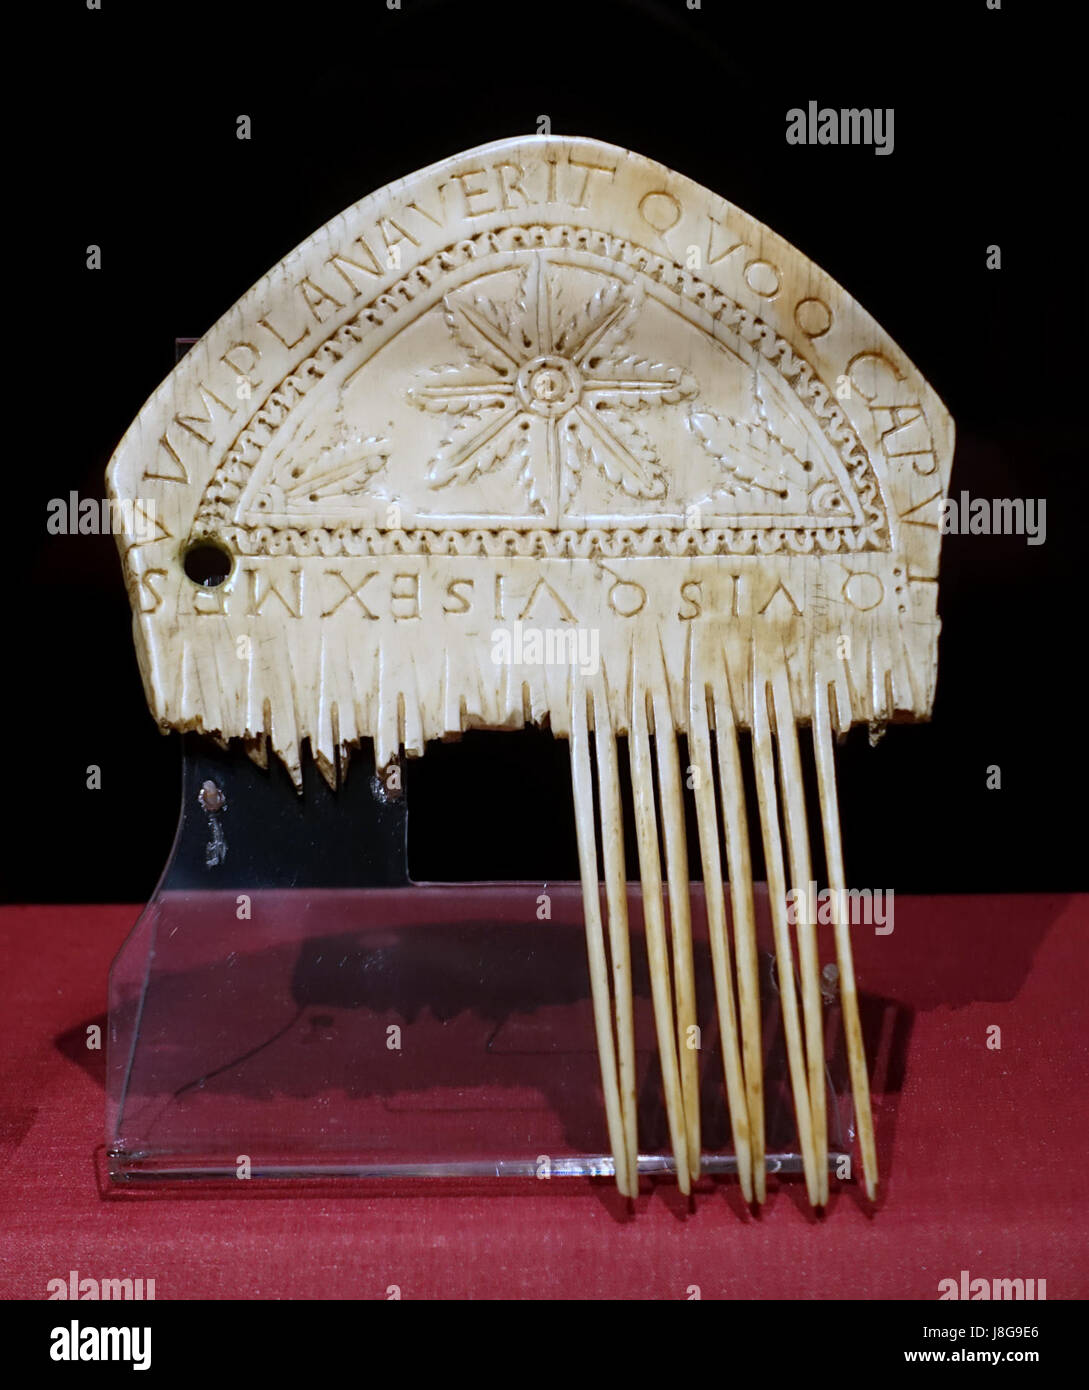 Liturgical comb, Atelier de Metz, from the former abbey of Saint Remacle in Stavelot, 11th century AD, ivory   Cinquantenaire Museum   Brussels, Belgium   DSC08791 Stock Photo